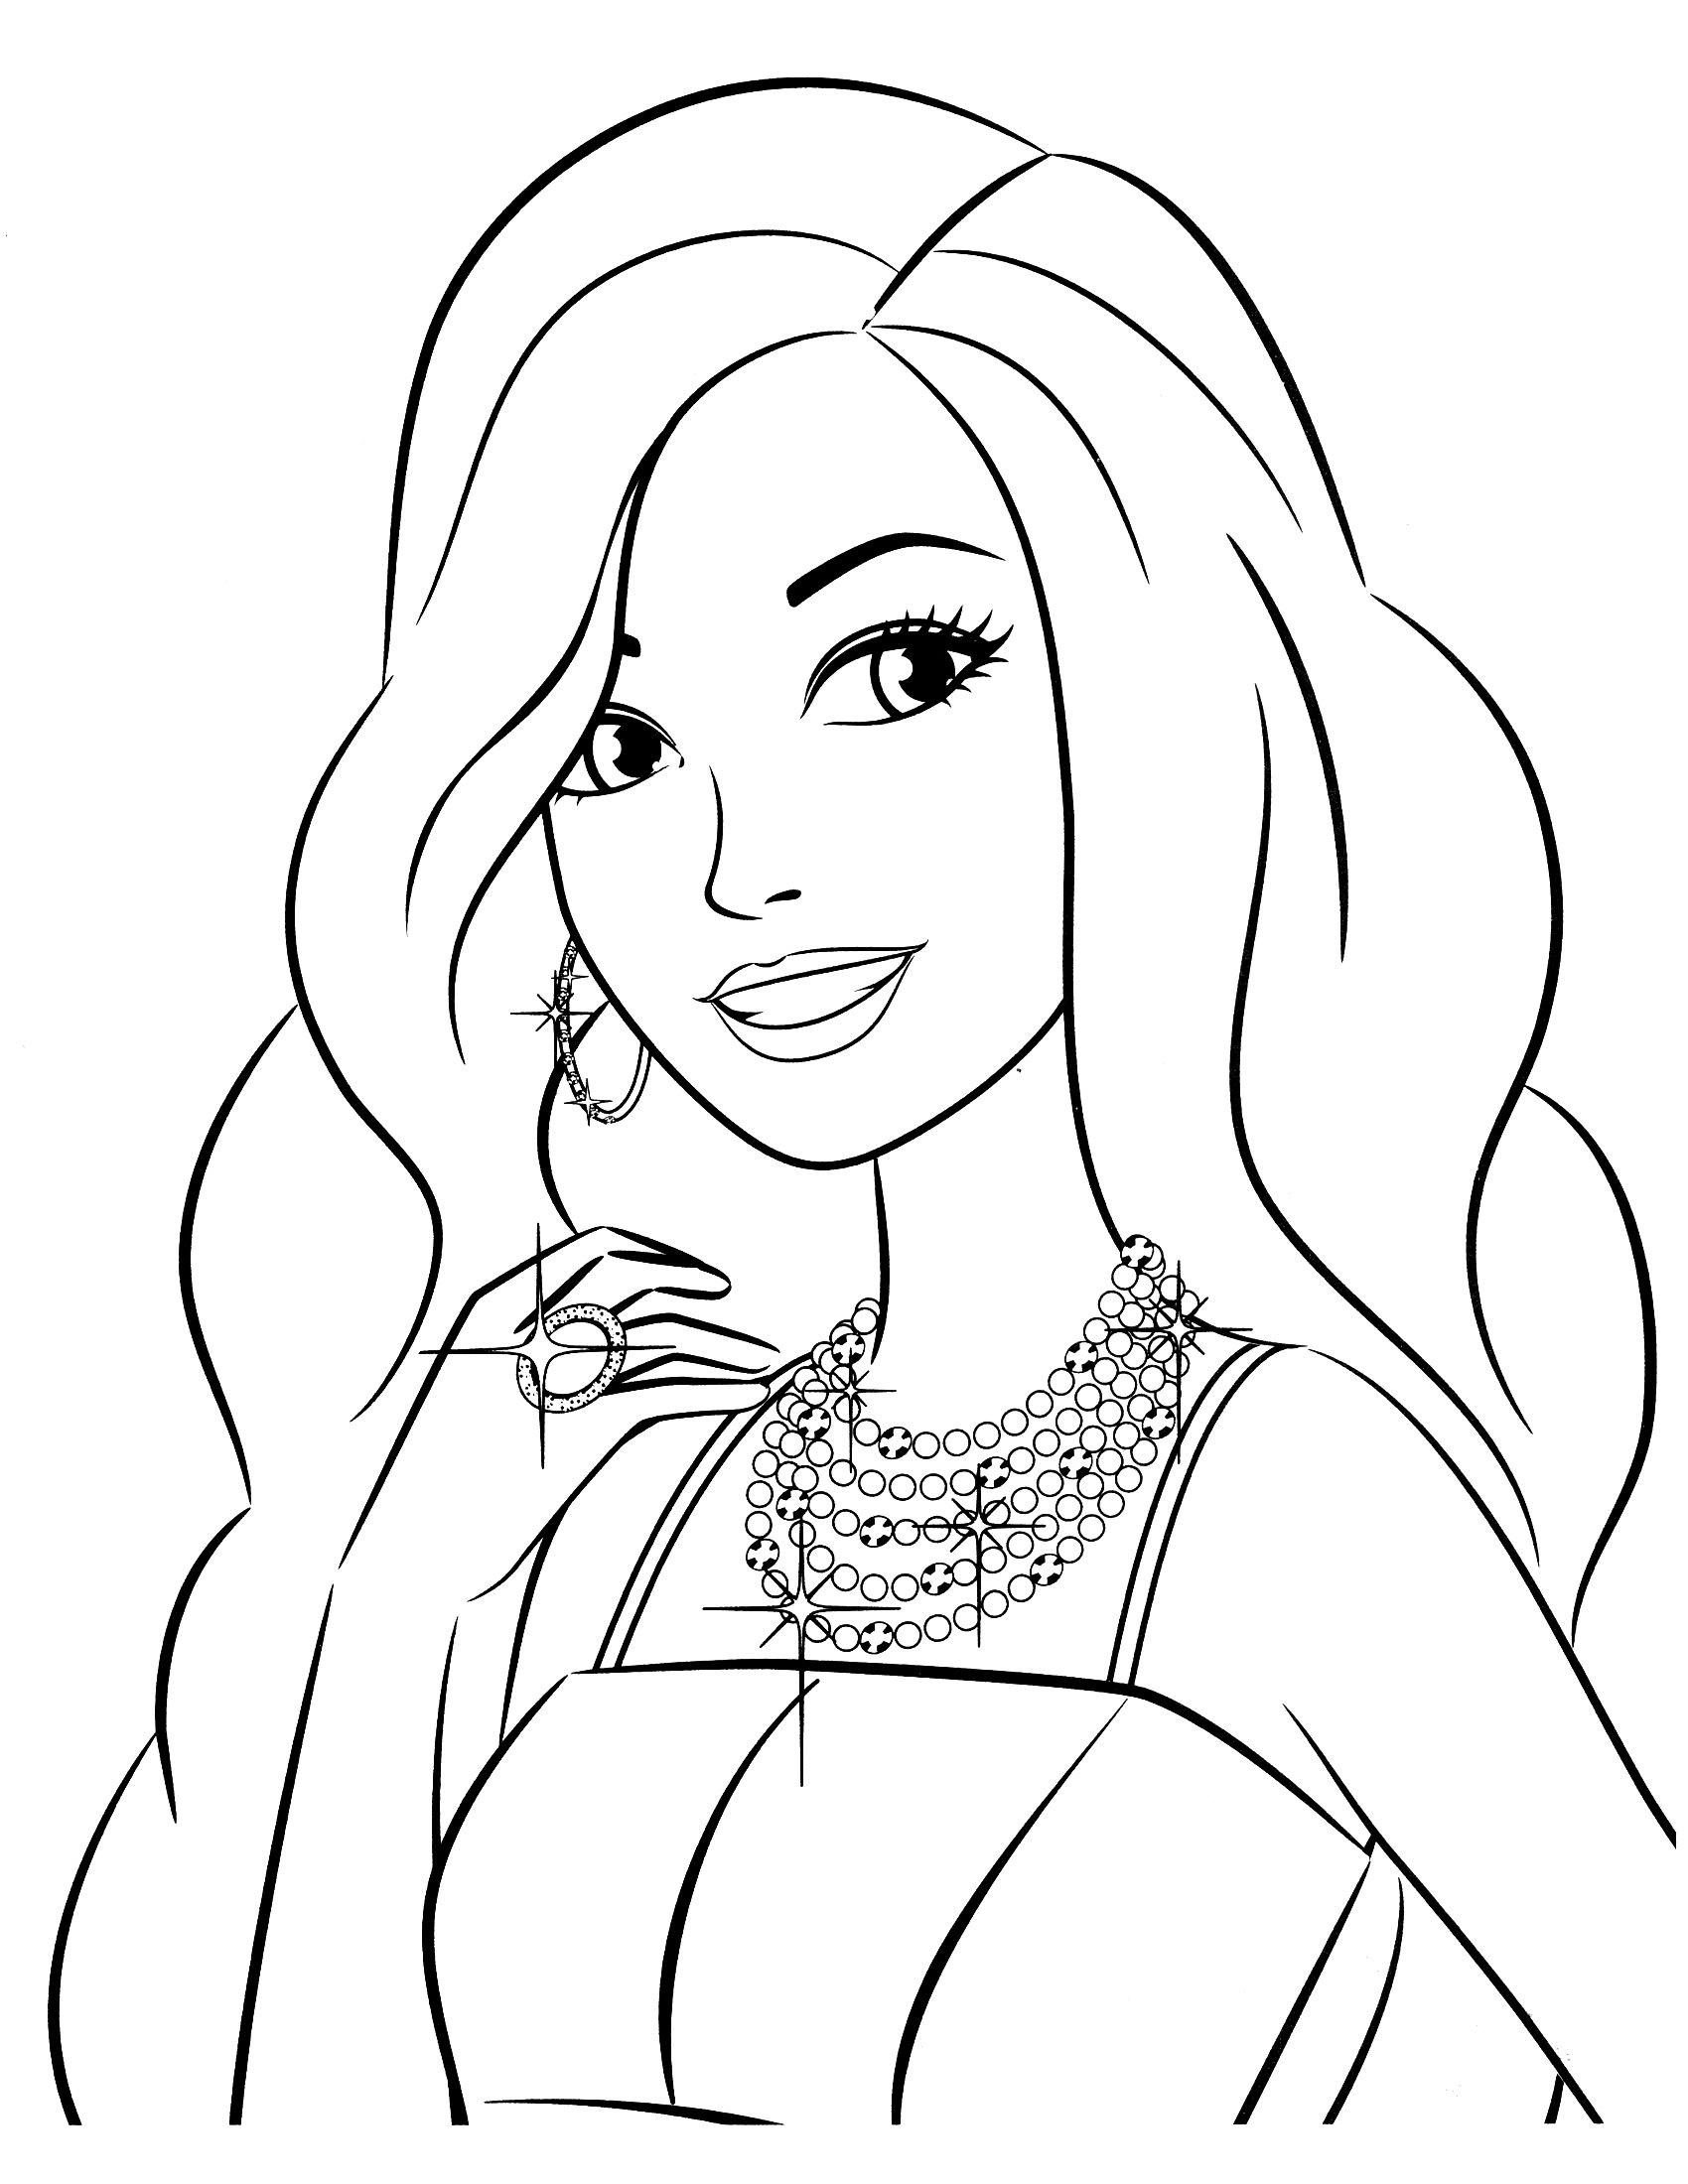 Girl Faces Coloring Sheets For Girls
 Coloring Pages Girls Faces Download